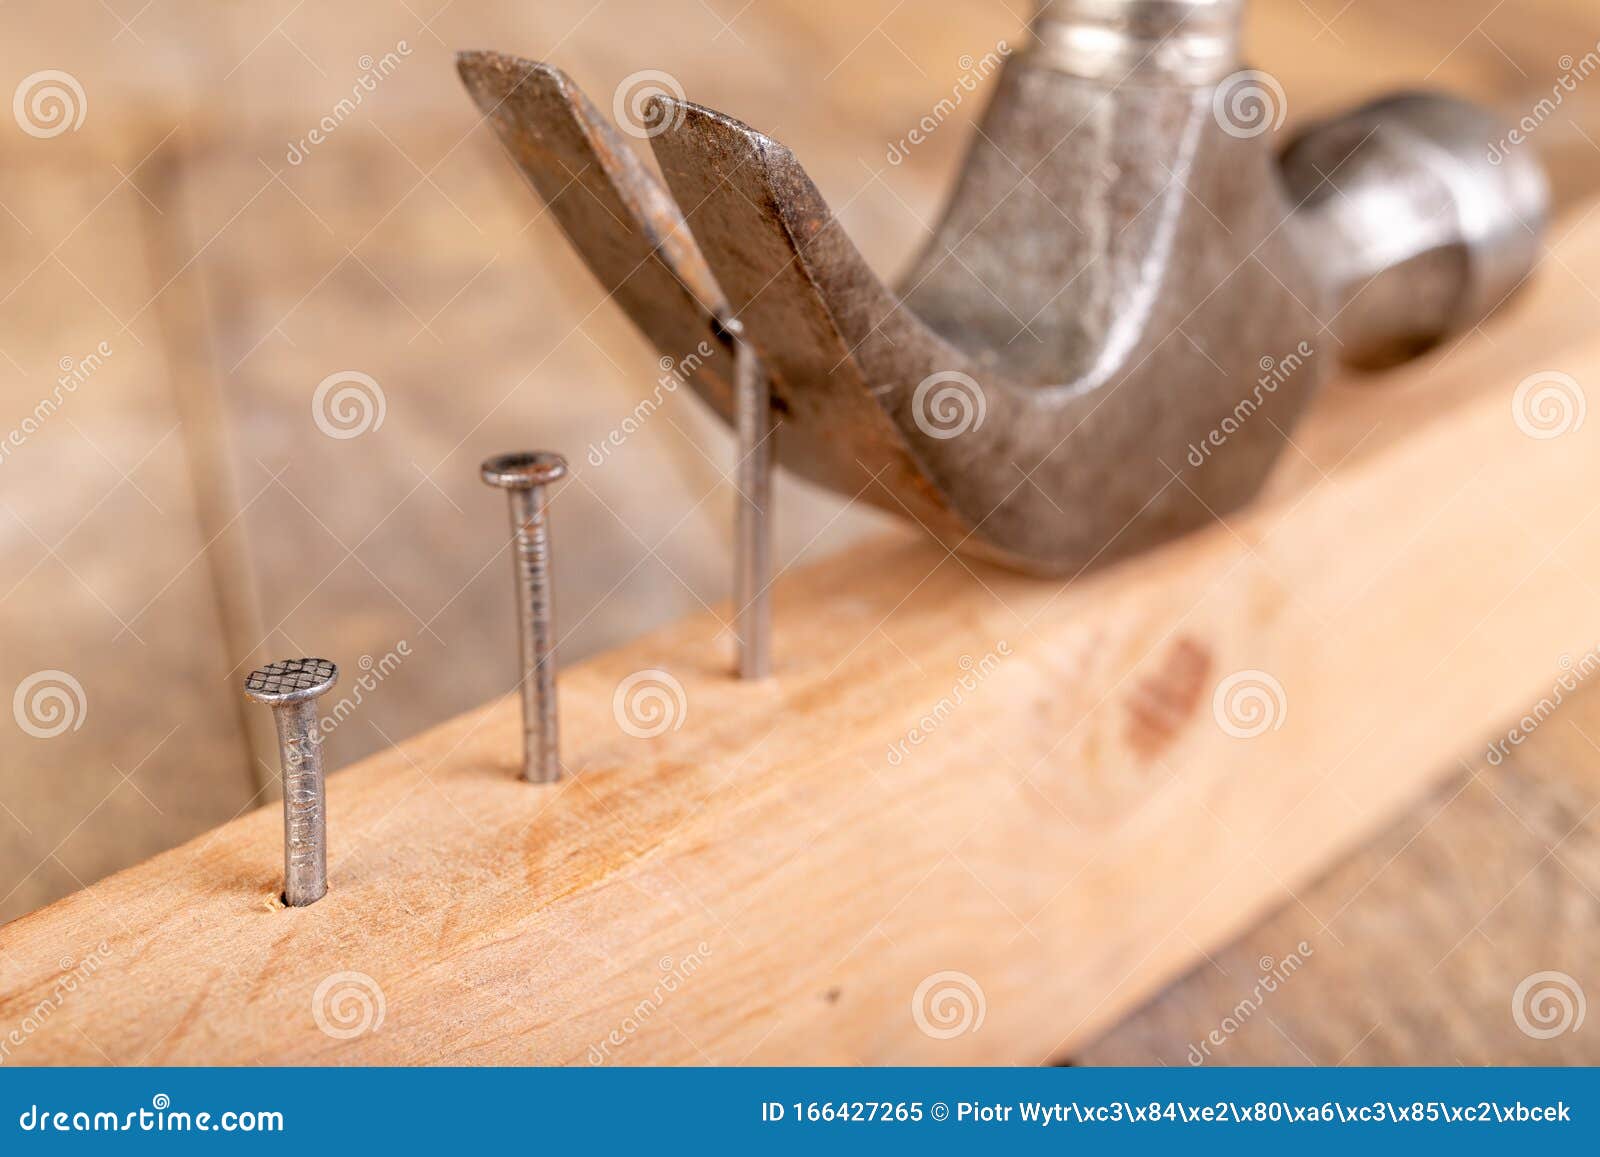 pulling out nails from a piece of wood using a carpenter& x27;s hammer. small carpentry work in the workshop